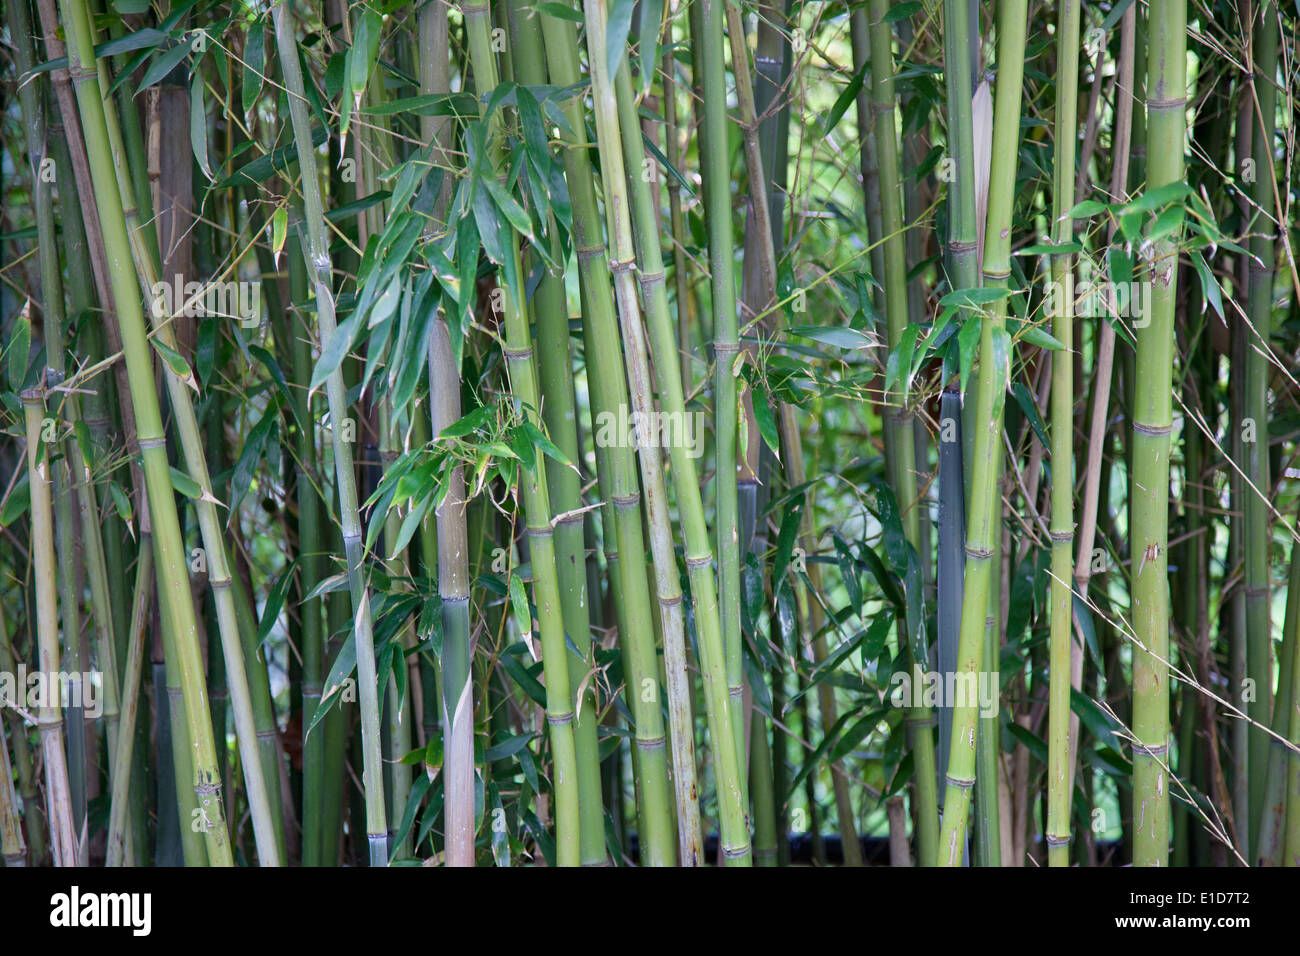 bamboo forest background Stock Photo